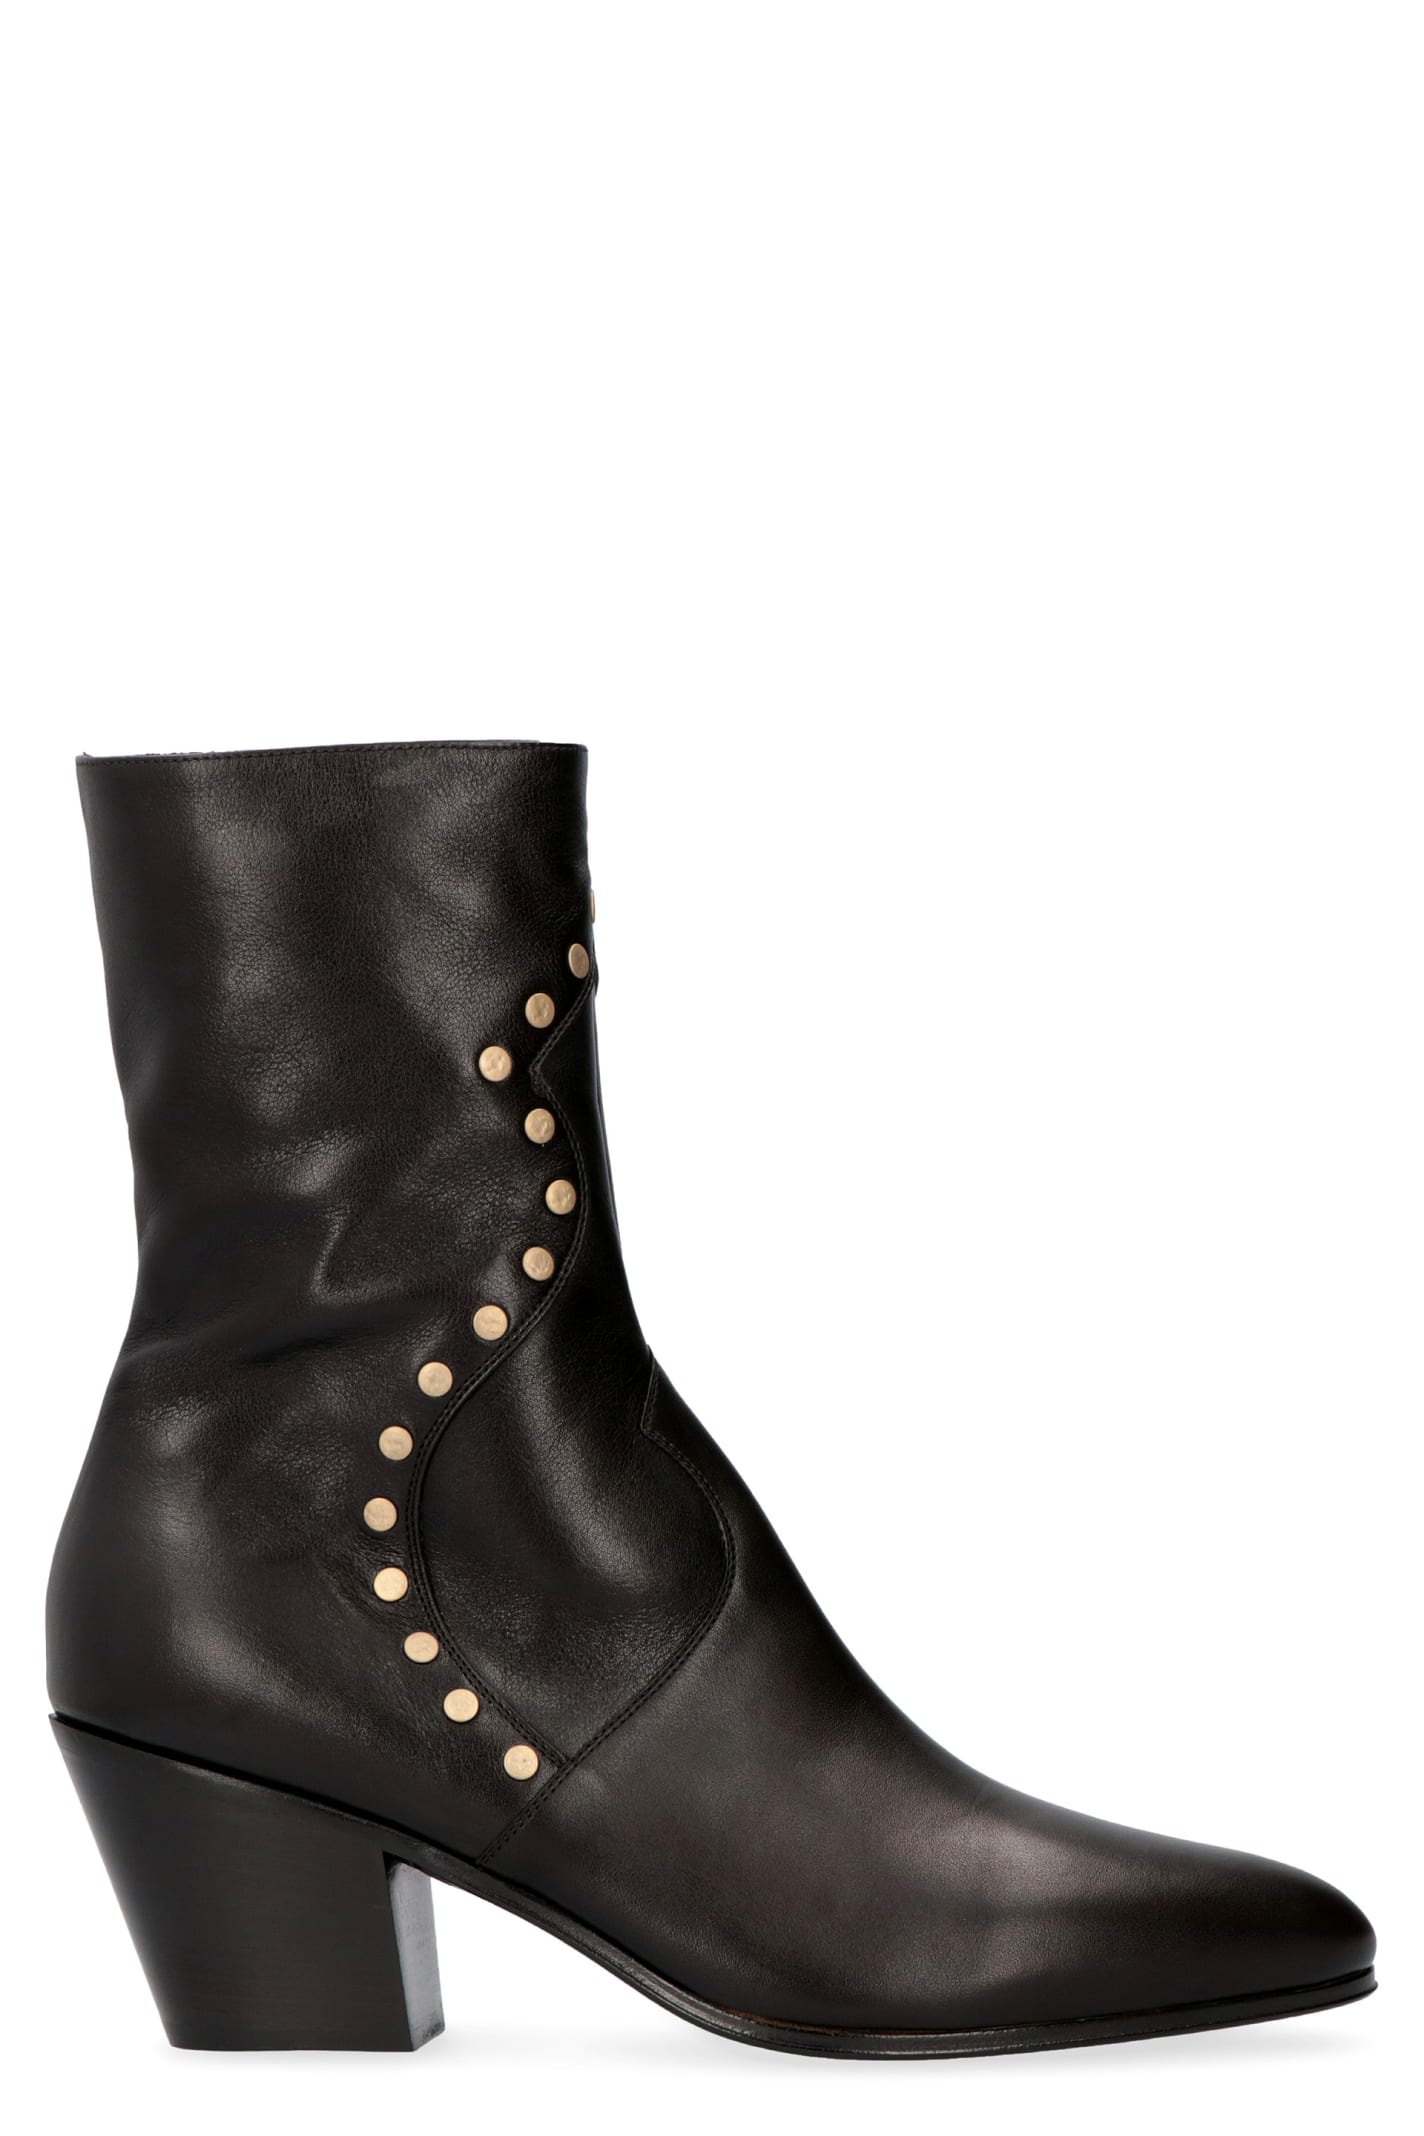 Buy Celine Studded Leather Ankle Boots online, shop Celine shoes with free shipping